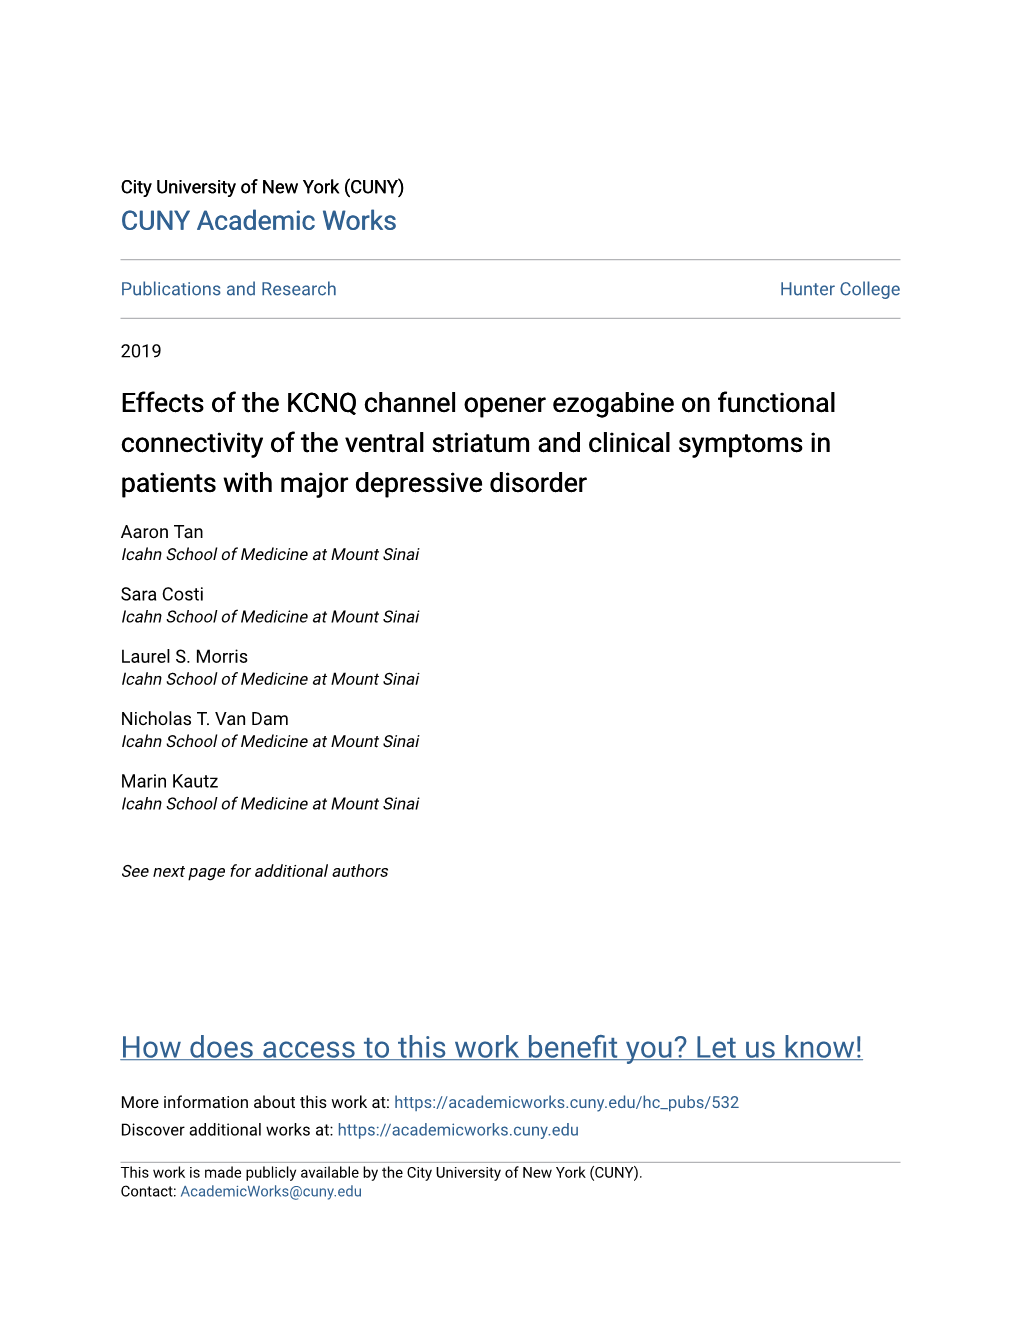 Effects of the KCNQ Channel Opener Ezogabine on Functional Connectivity of the Ventral Striatum and Clinical Symptoms in Patients with Major Depressive Disorder